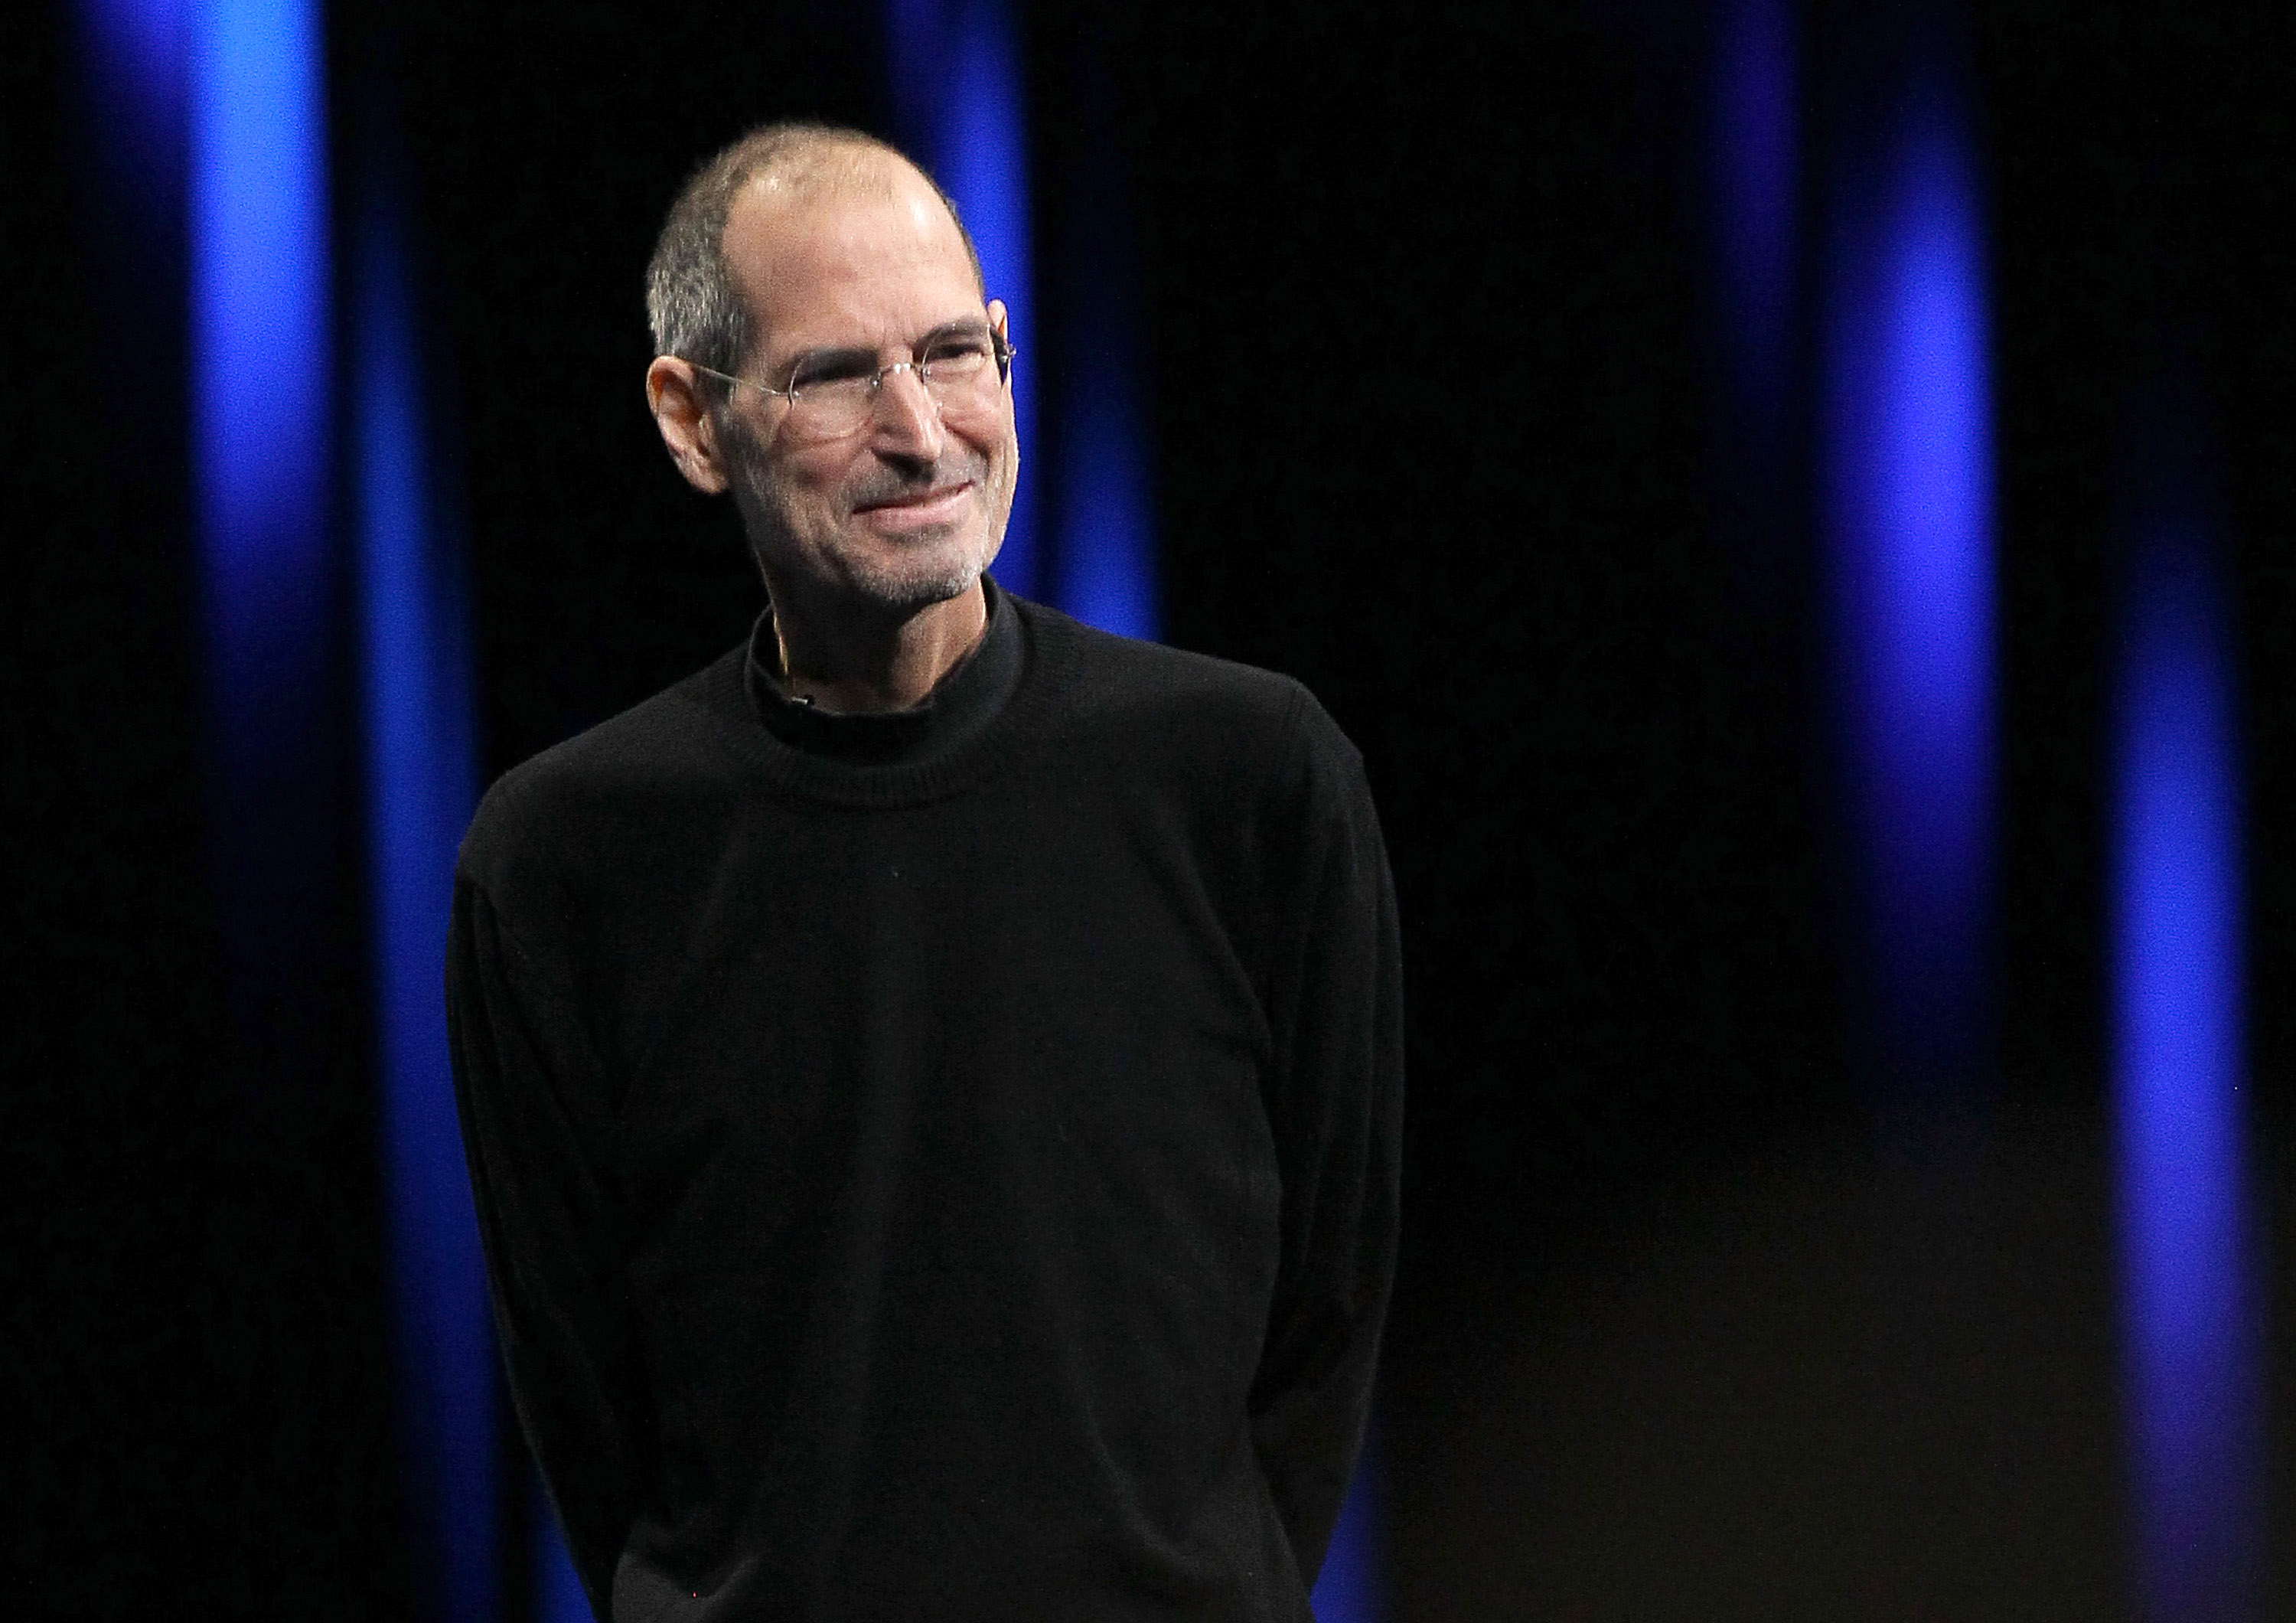 Steve Jobs Net Worth 5 Fast Facts You Need to Know